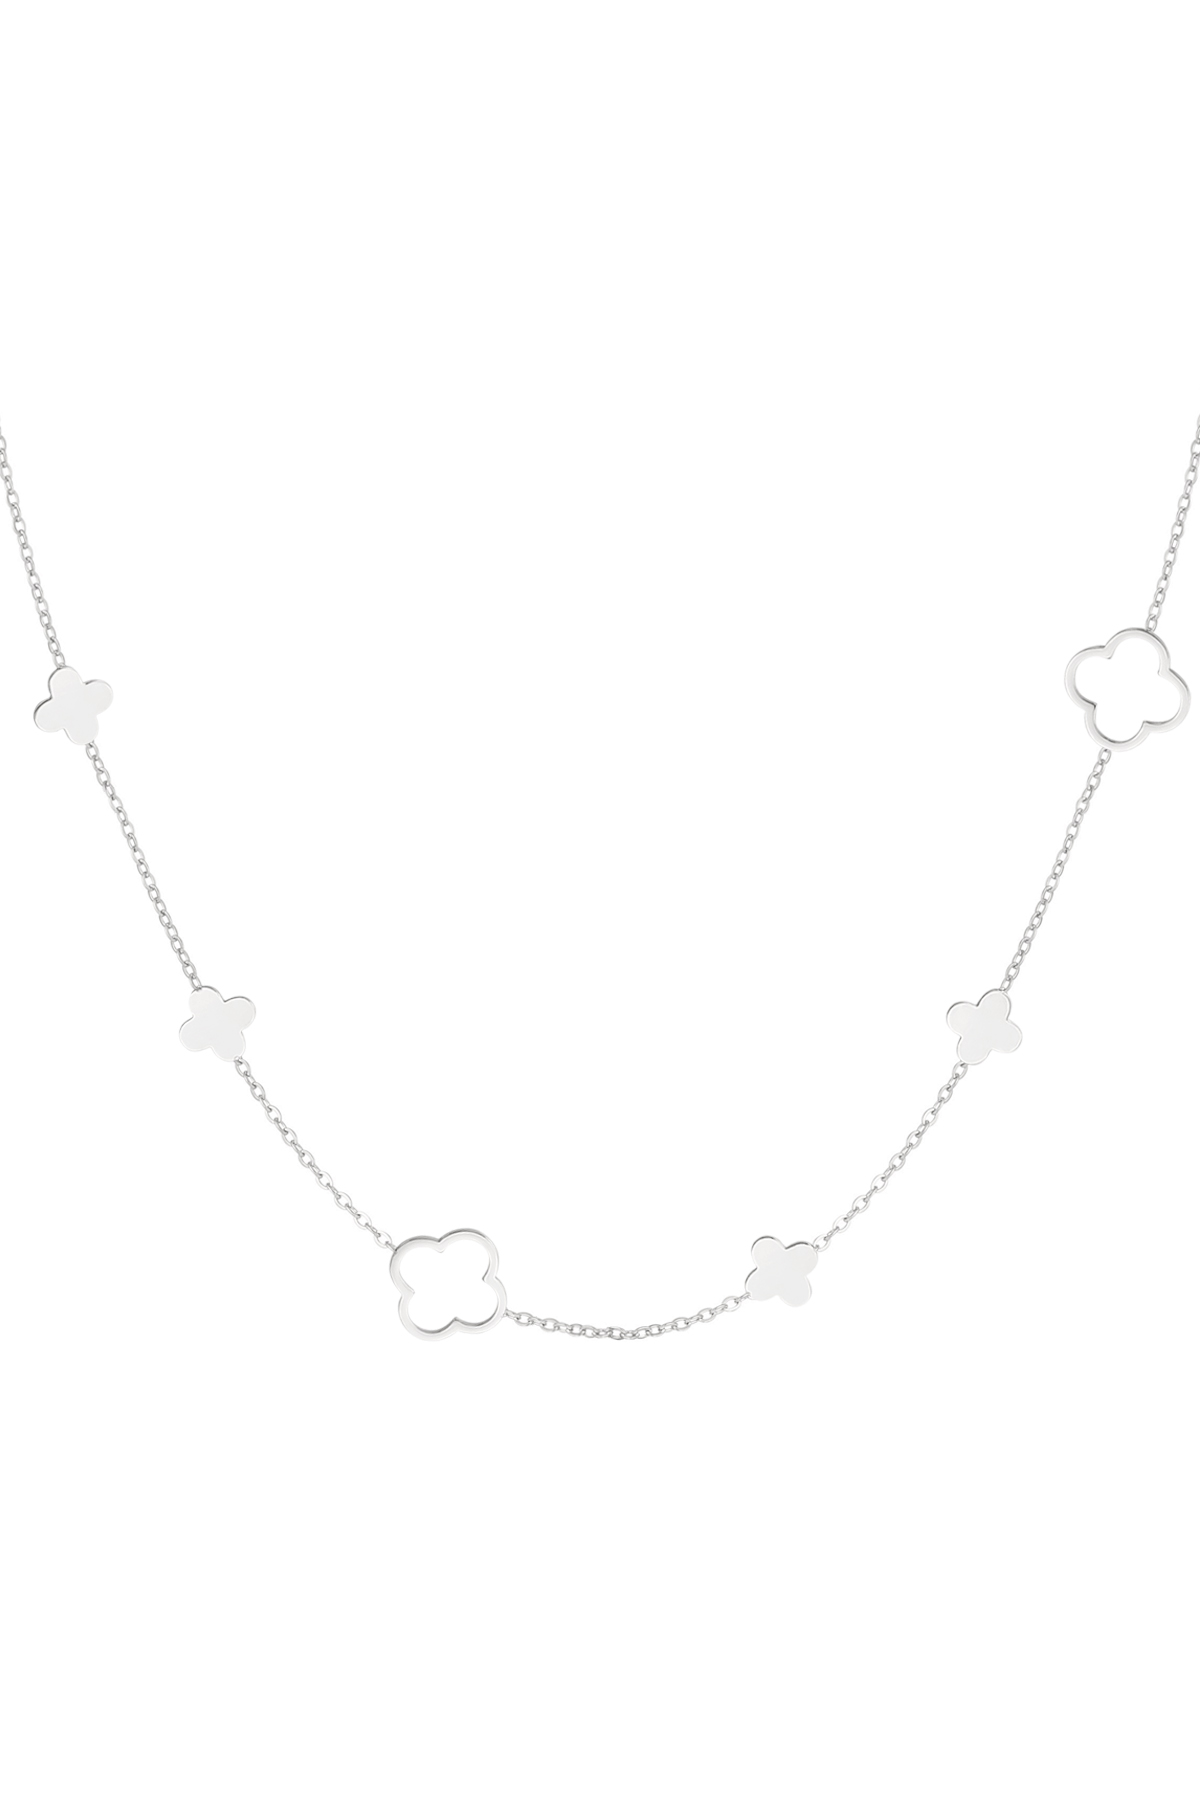 Necklace different clovers - silver h5 